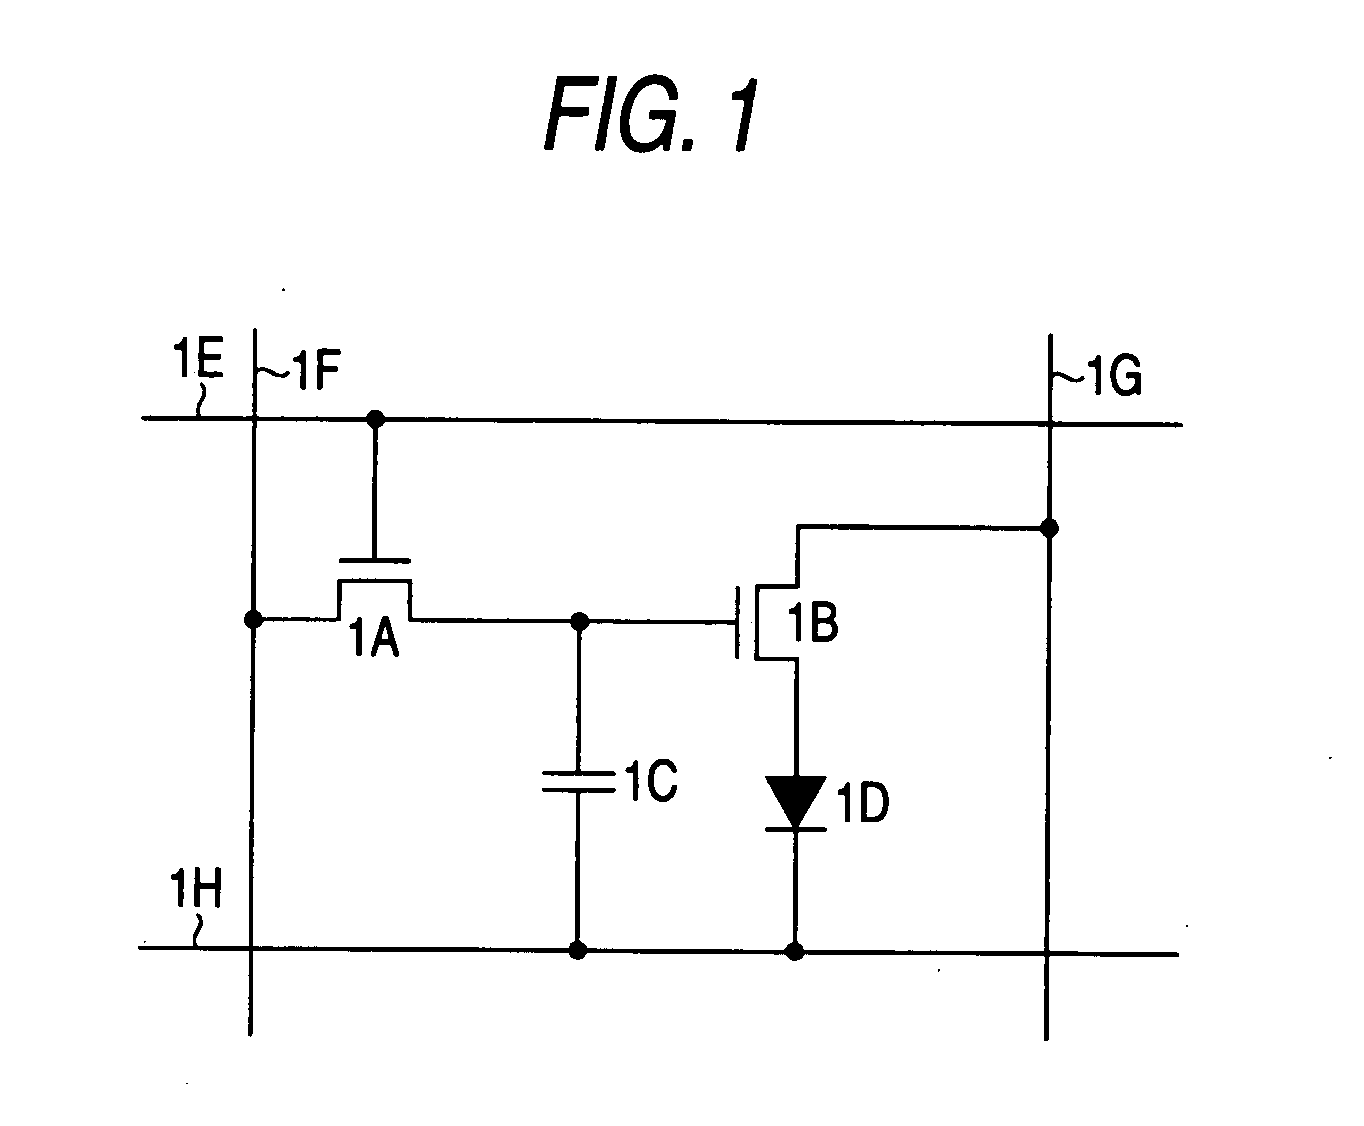 Display device and electronic equiipment